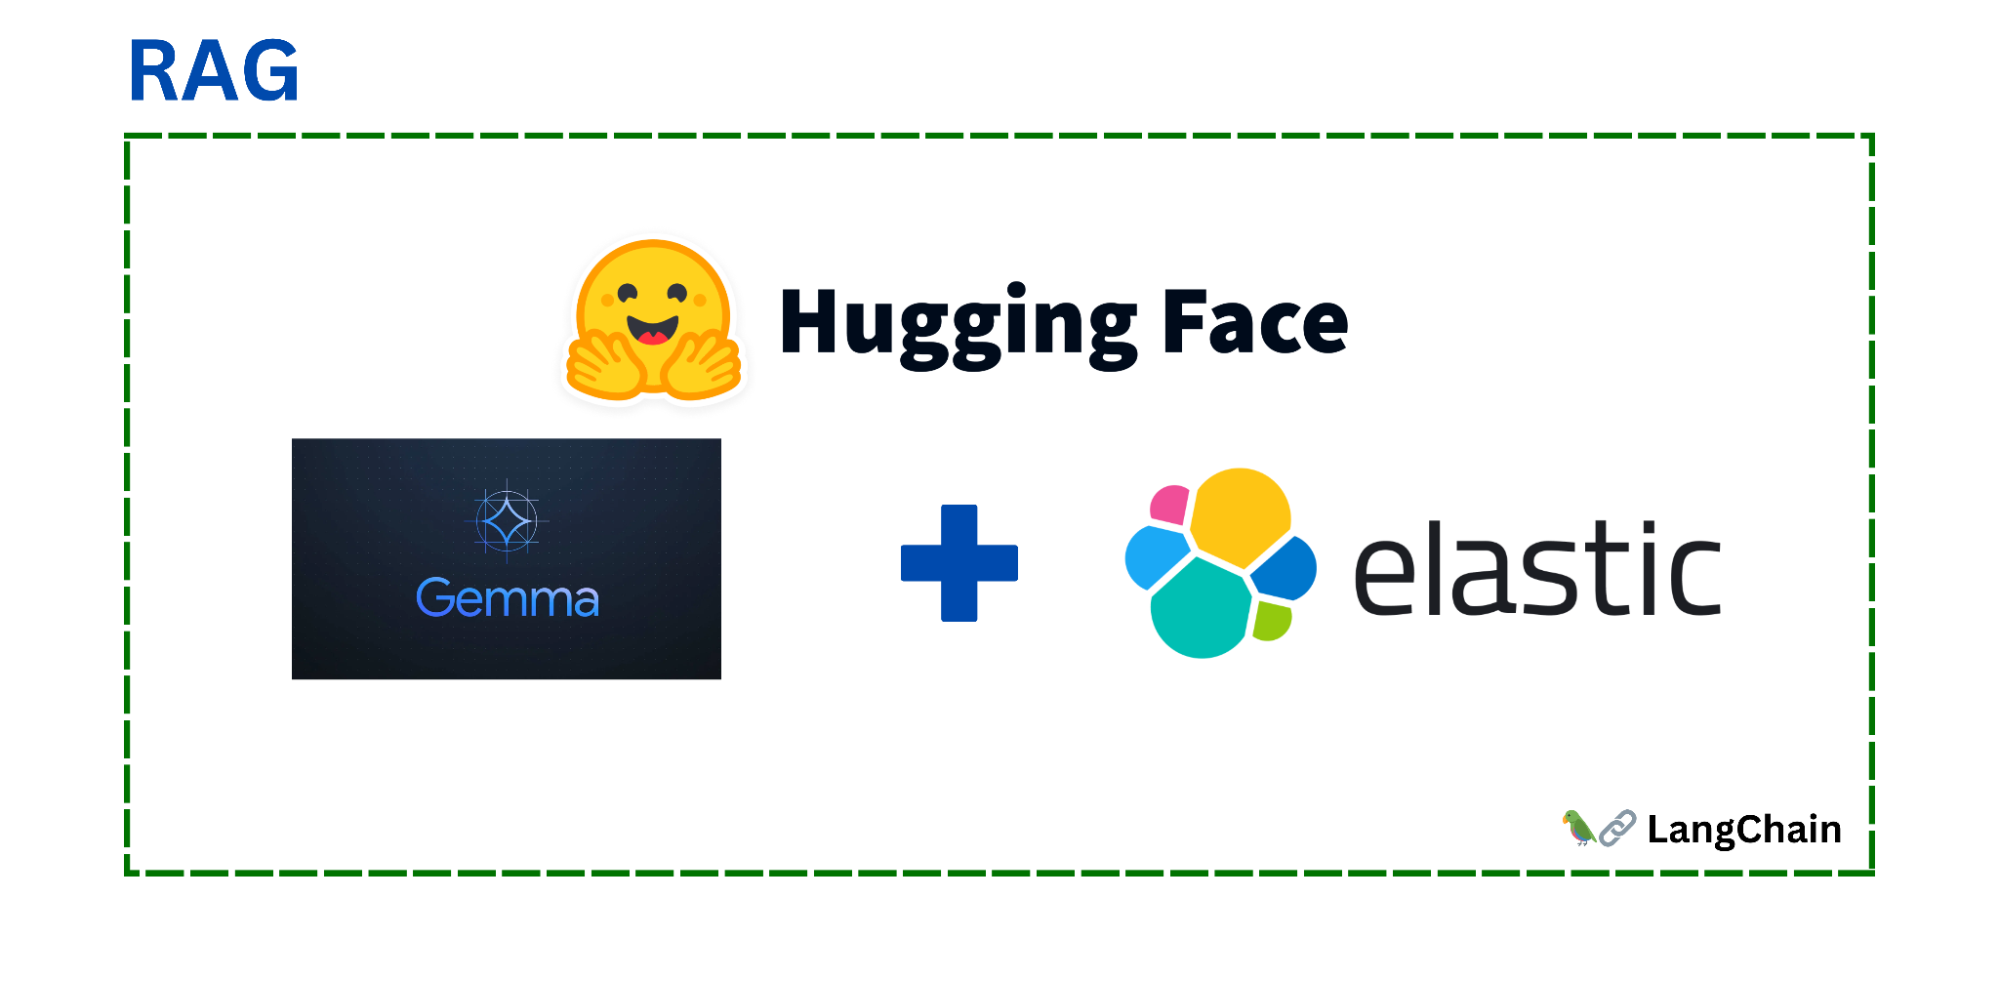 Building a RAG System With Gemma, Hugging Face & Elasticsearch